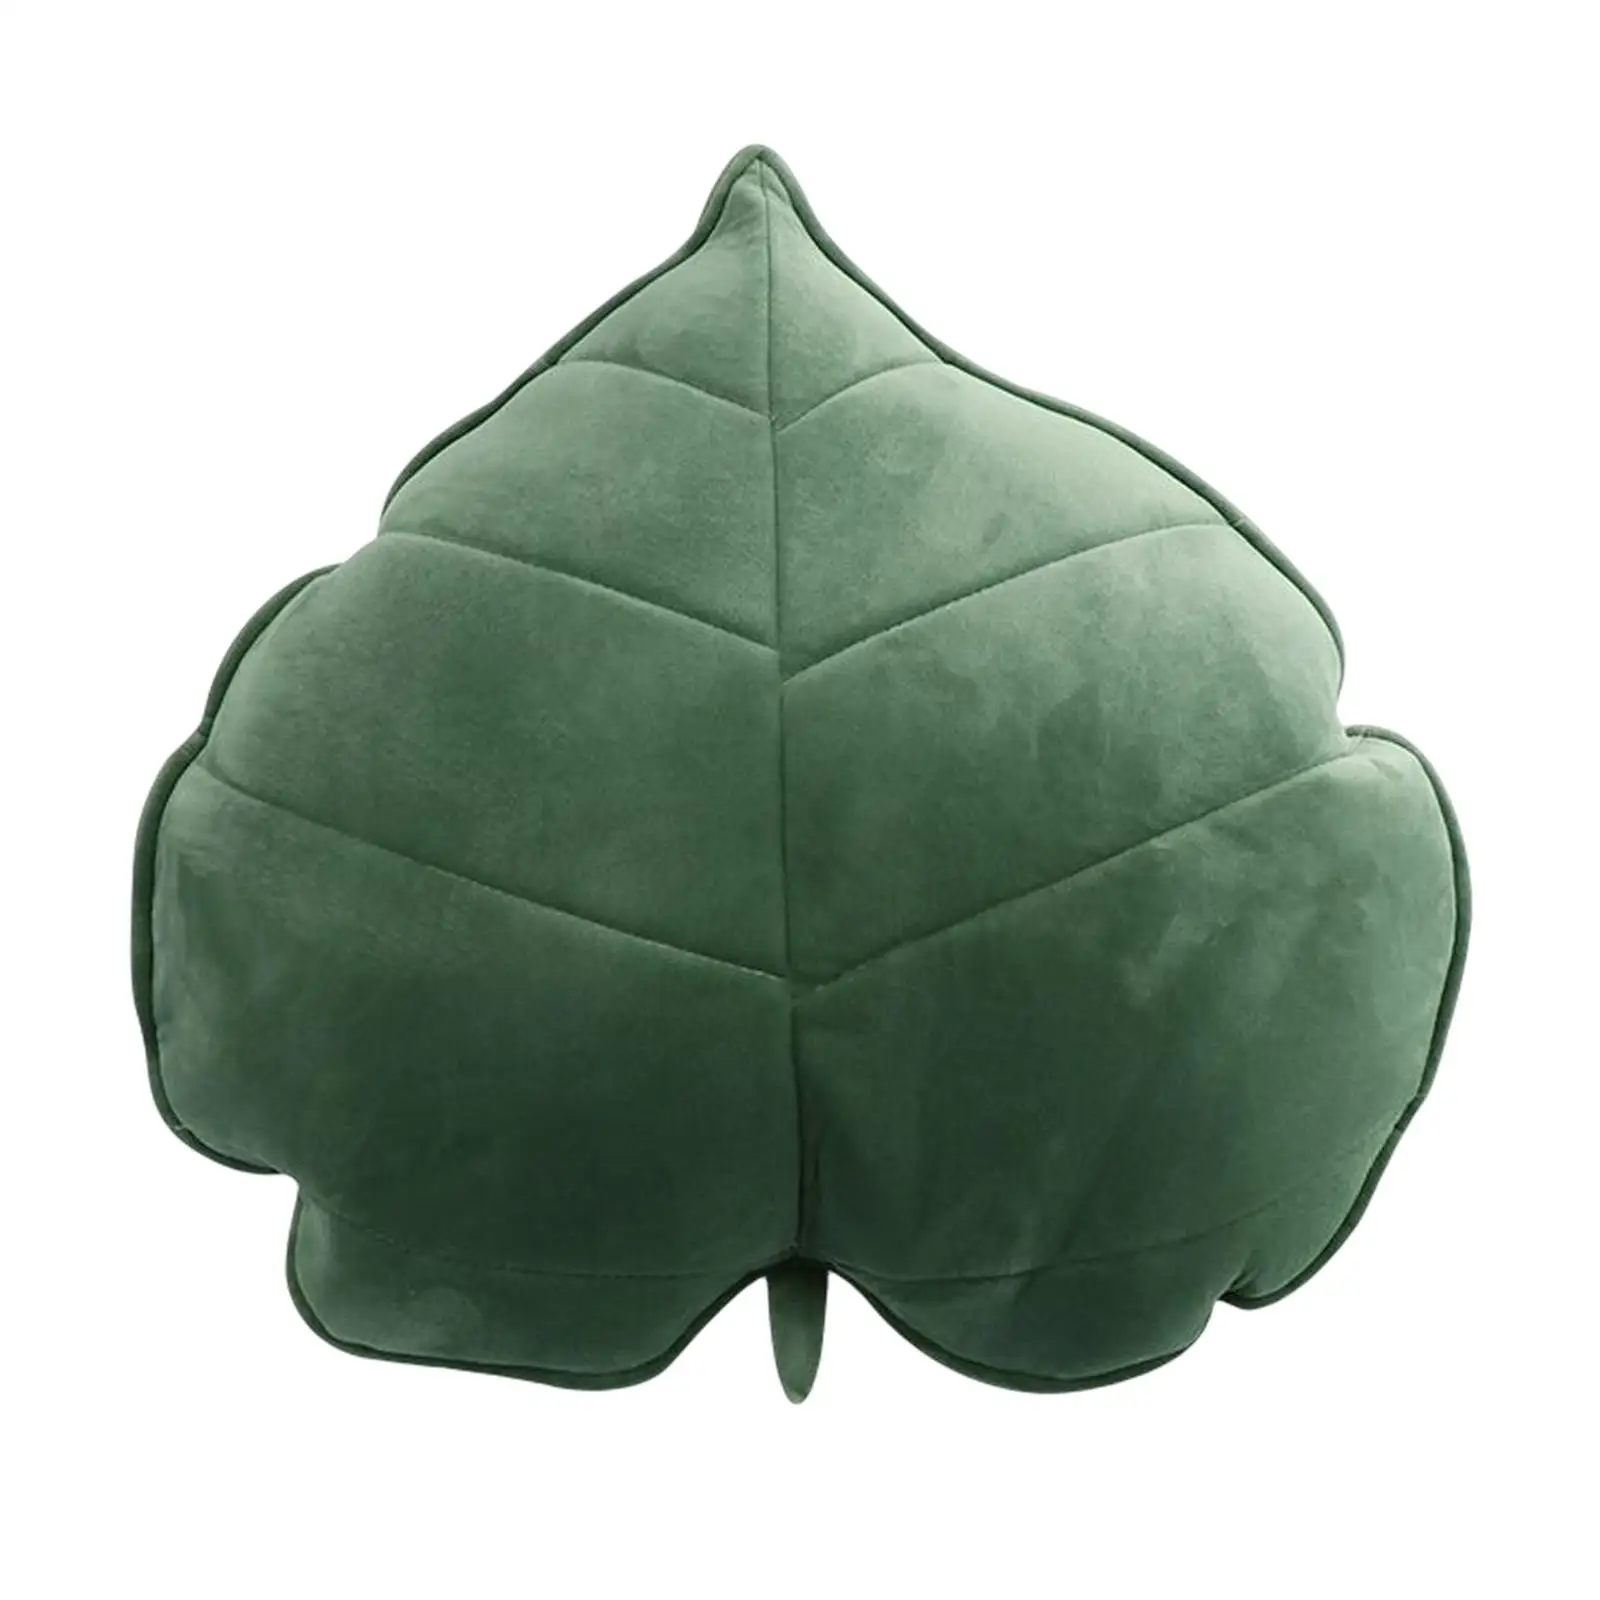 Cute Seat Cushion Body Pillow Sleeping Accompany Toy Stuffed Toy Leaf Appearance Plush Hug Pillow for Spring Home Decoration